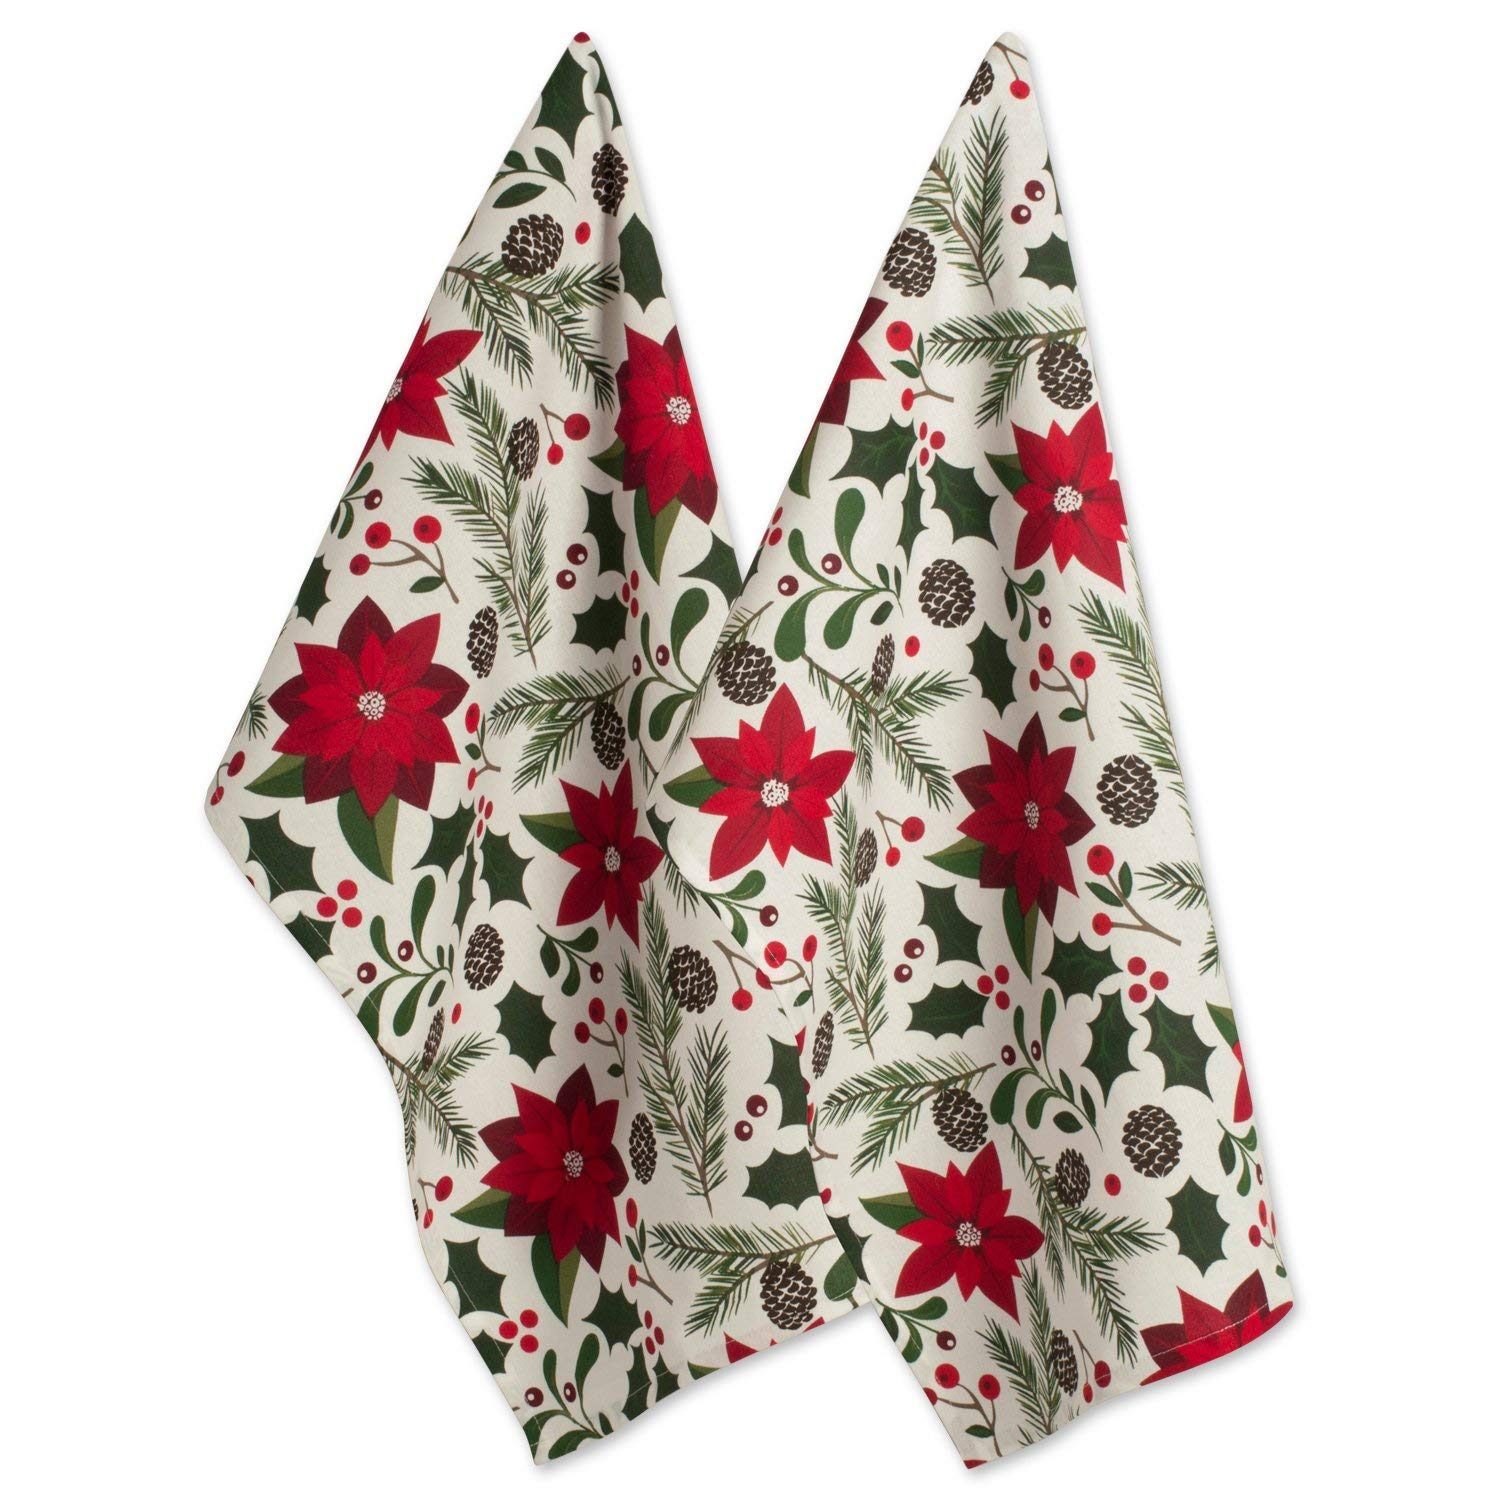 DII christmas Kitchen Towel Set, Floral Tea Towels for Baking, cleaning, Entertainment & cooking, 18x28, Woodland Holiday, 2 Pie